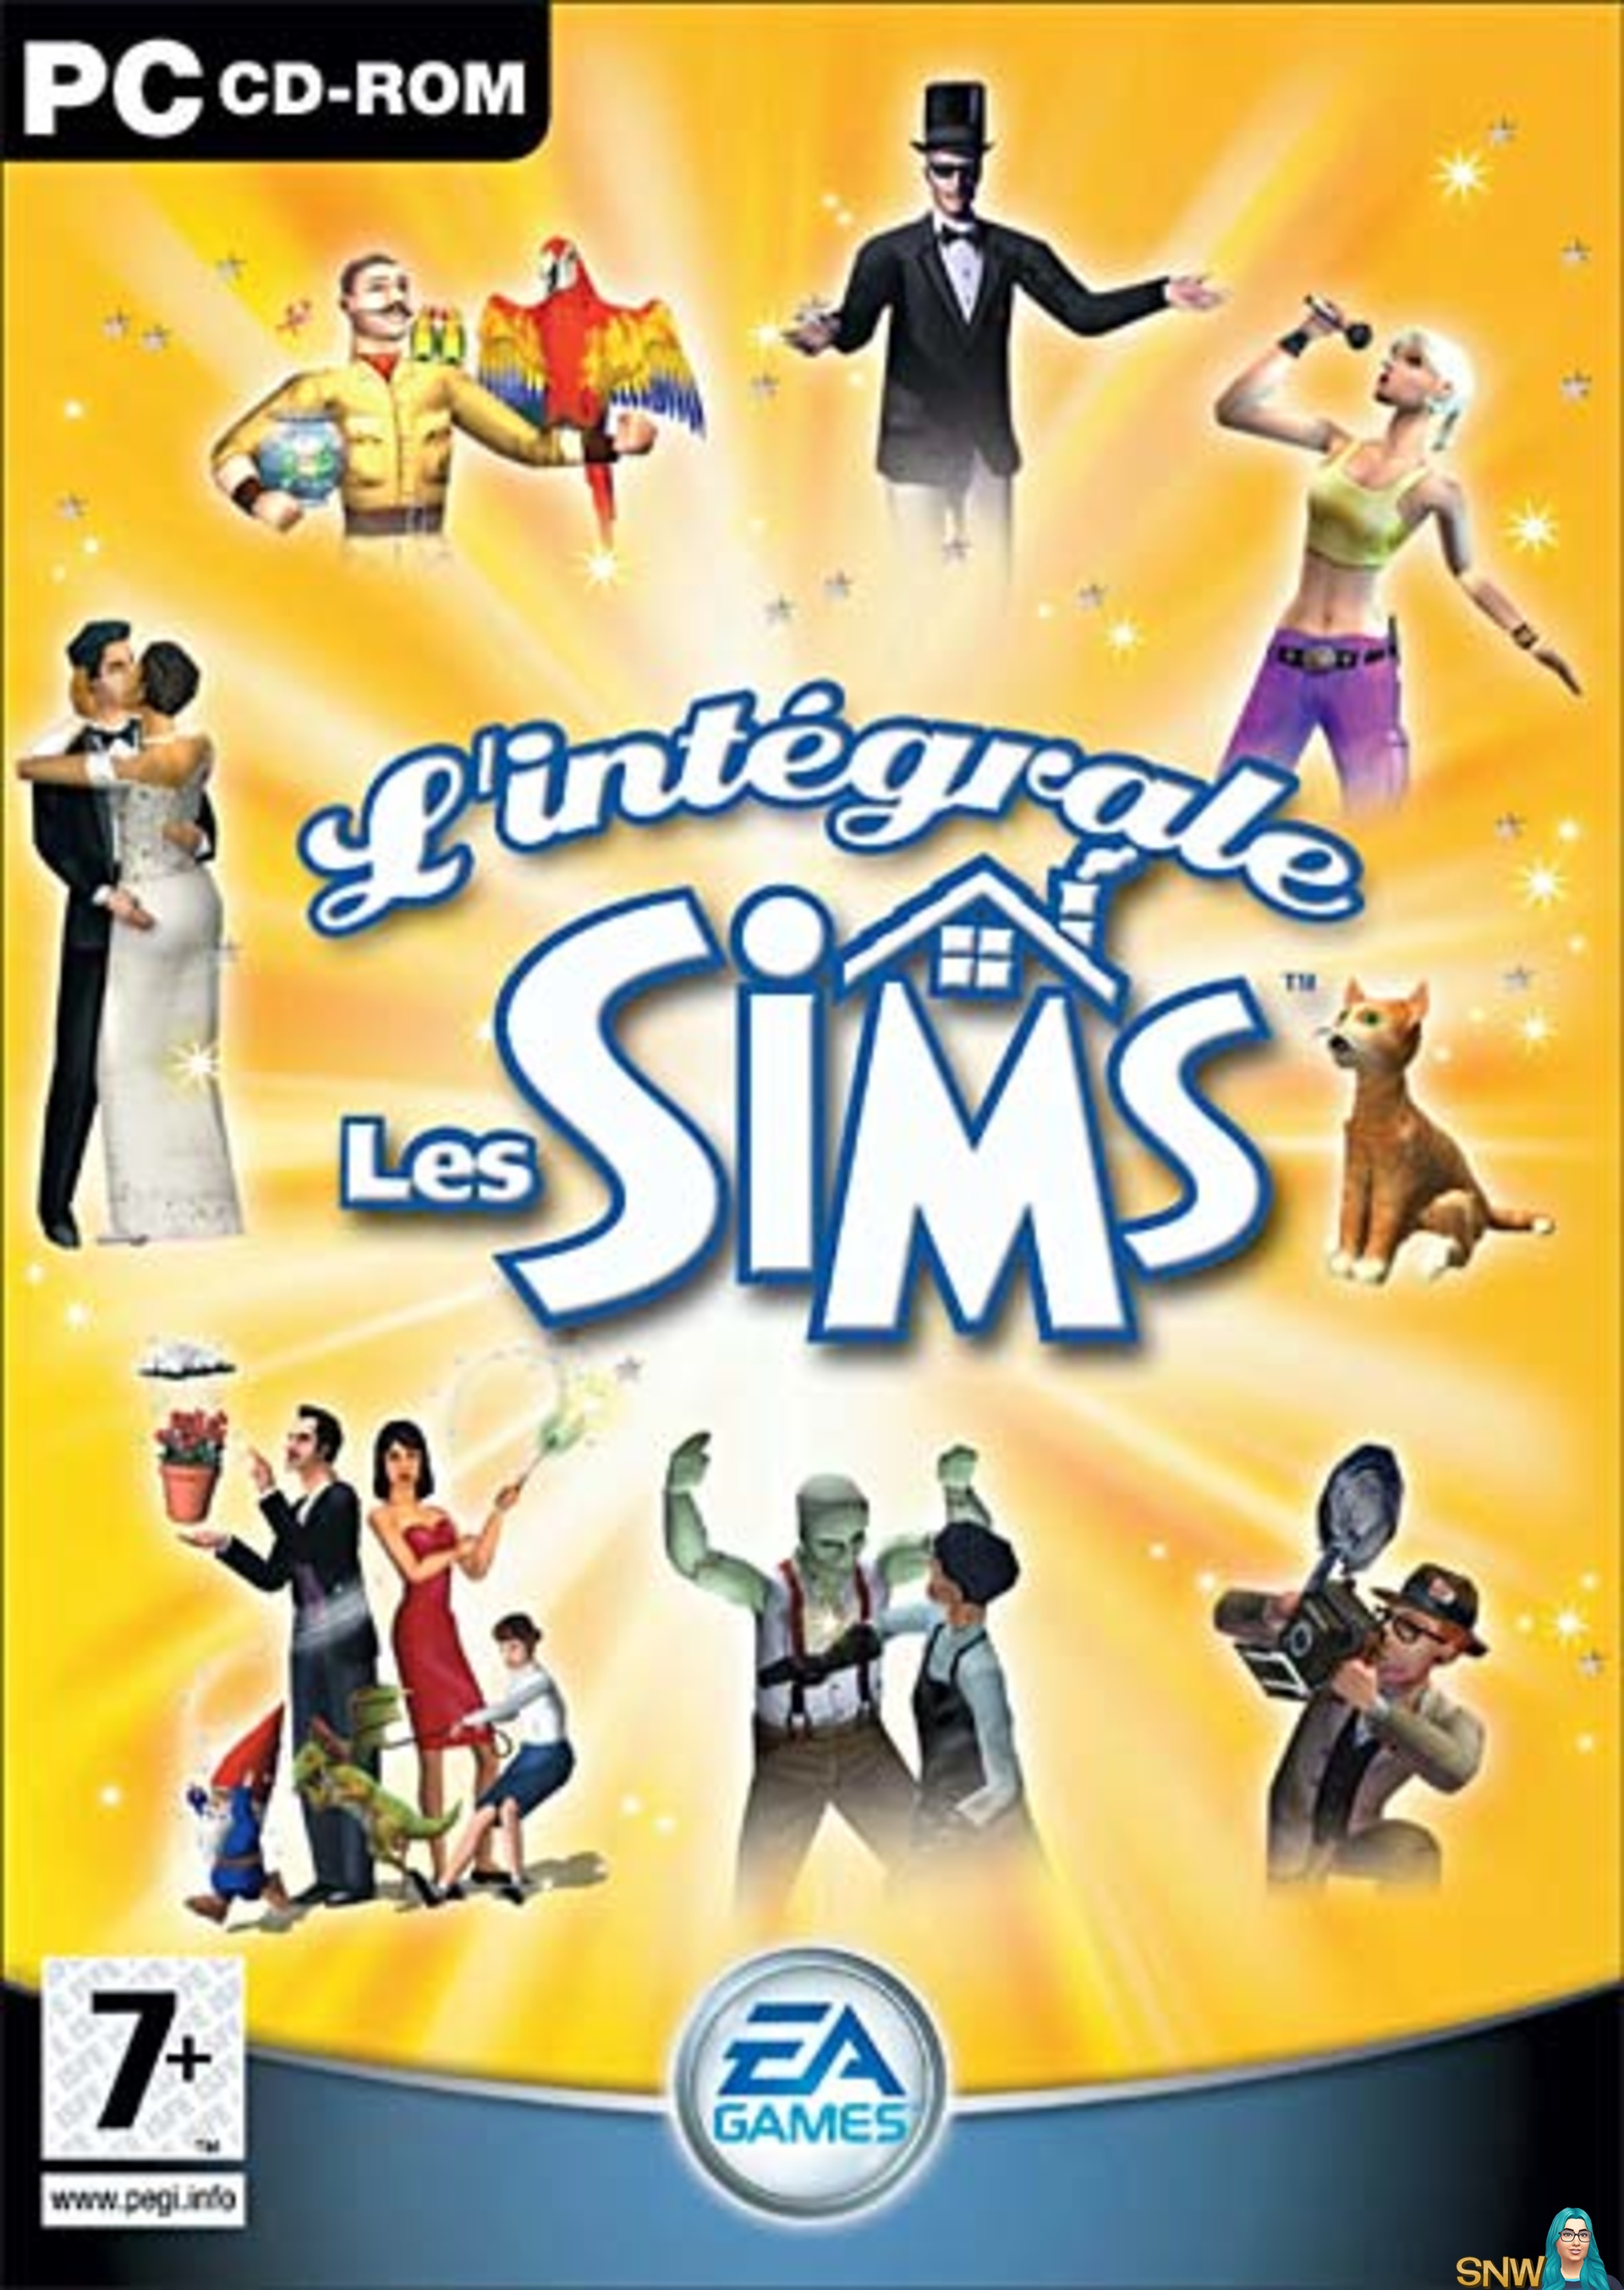 sims complete collection serial numbers